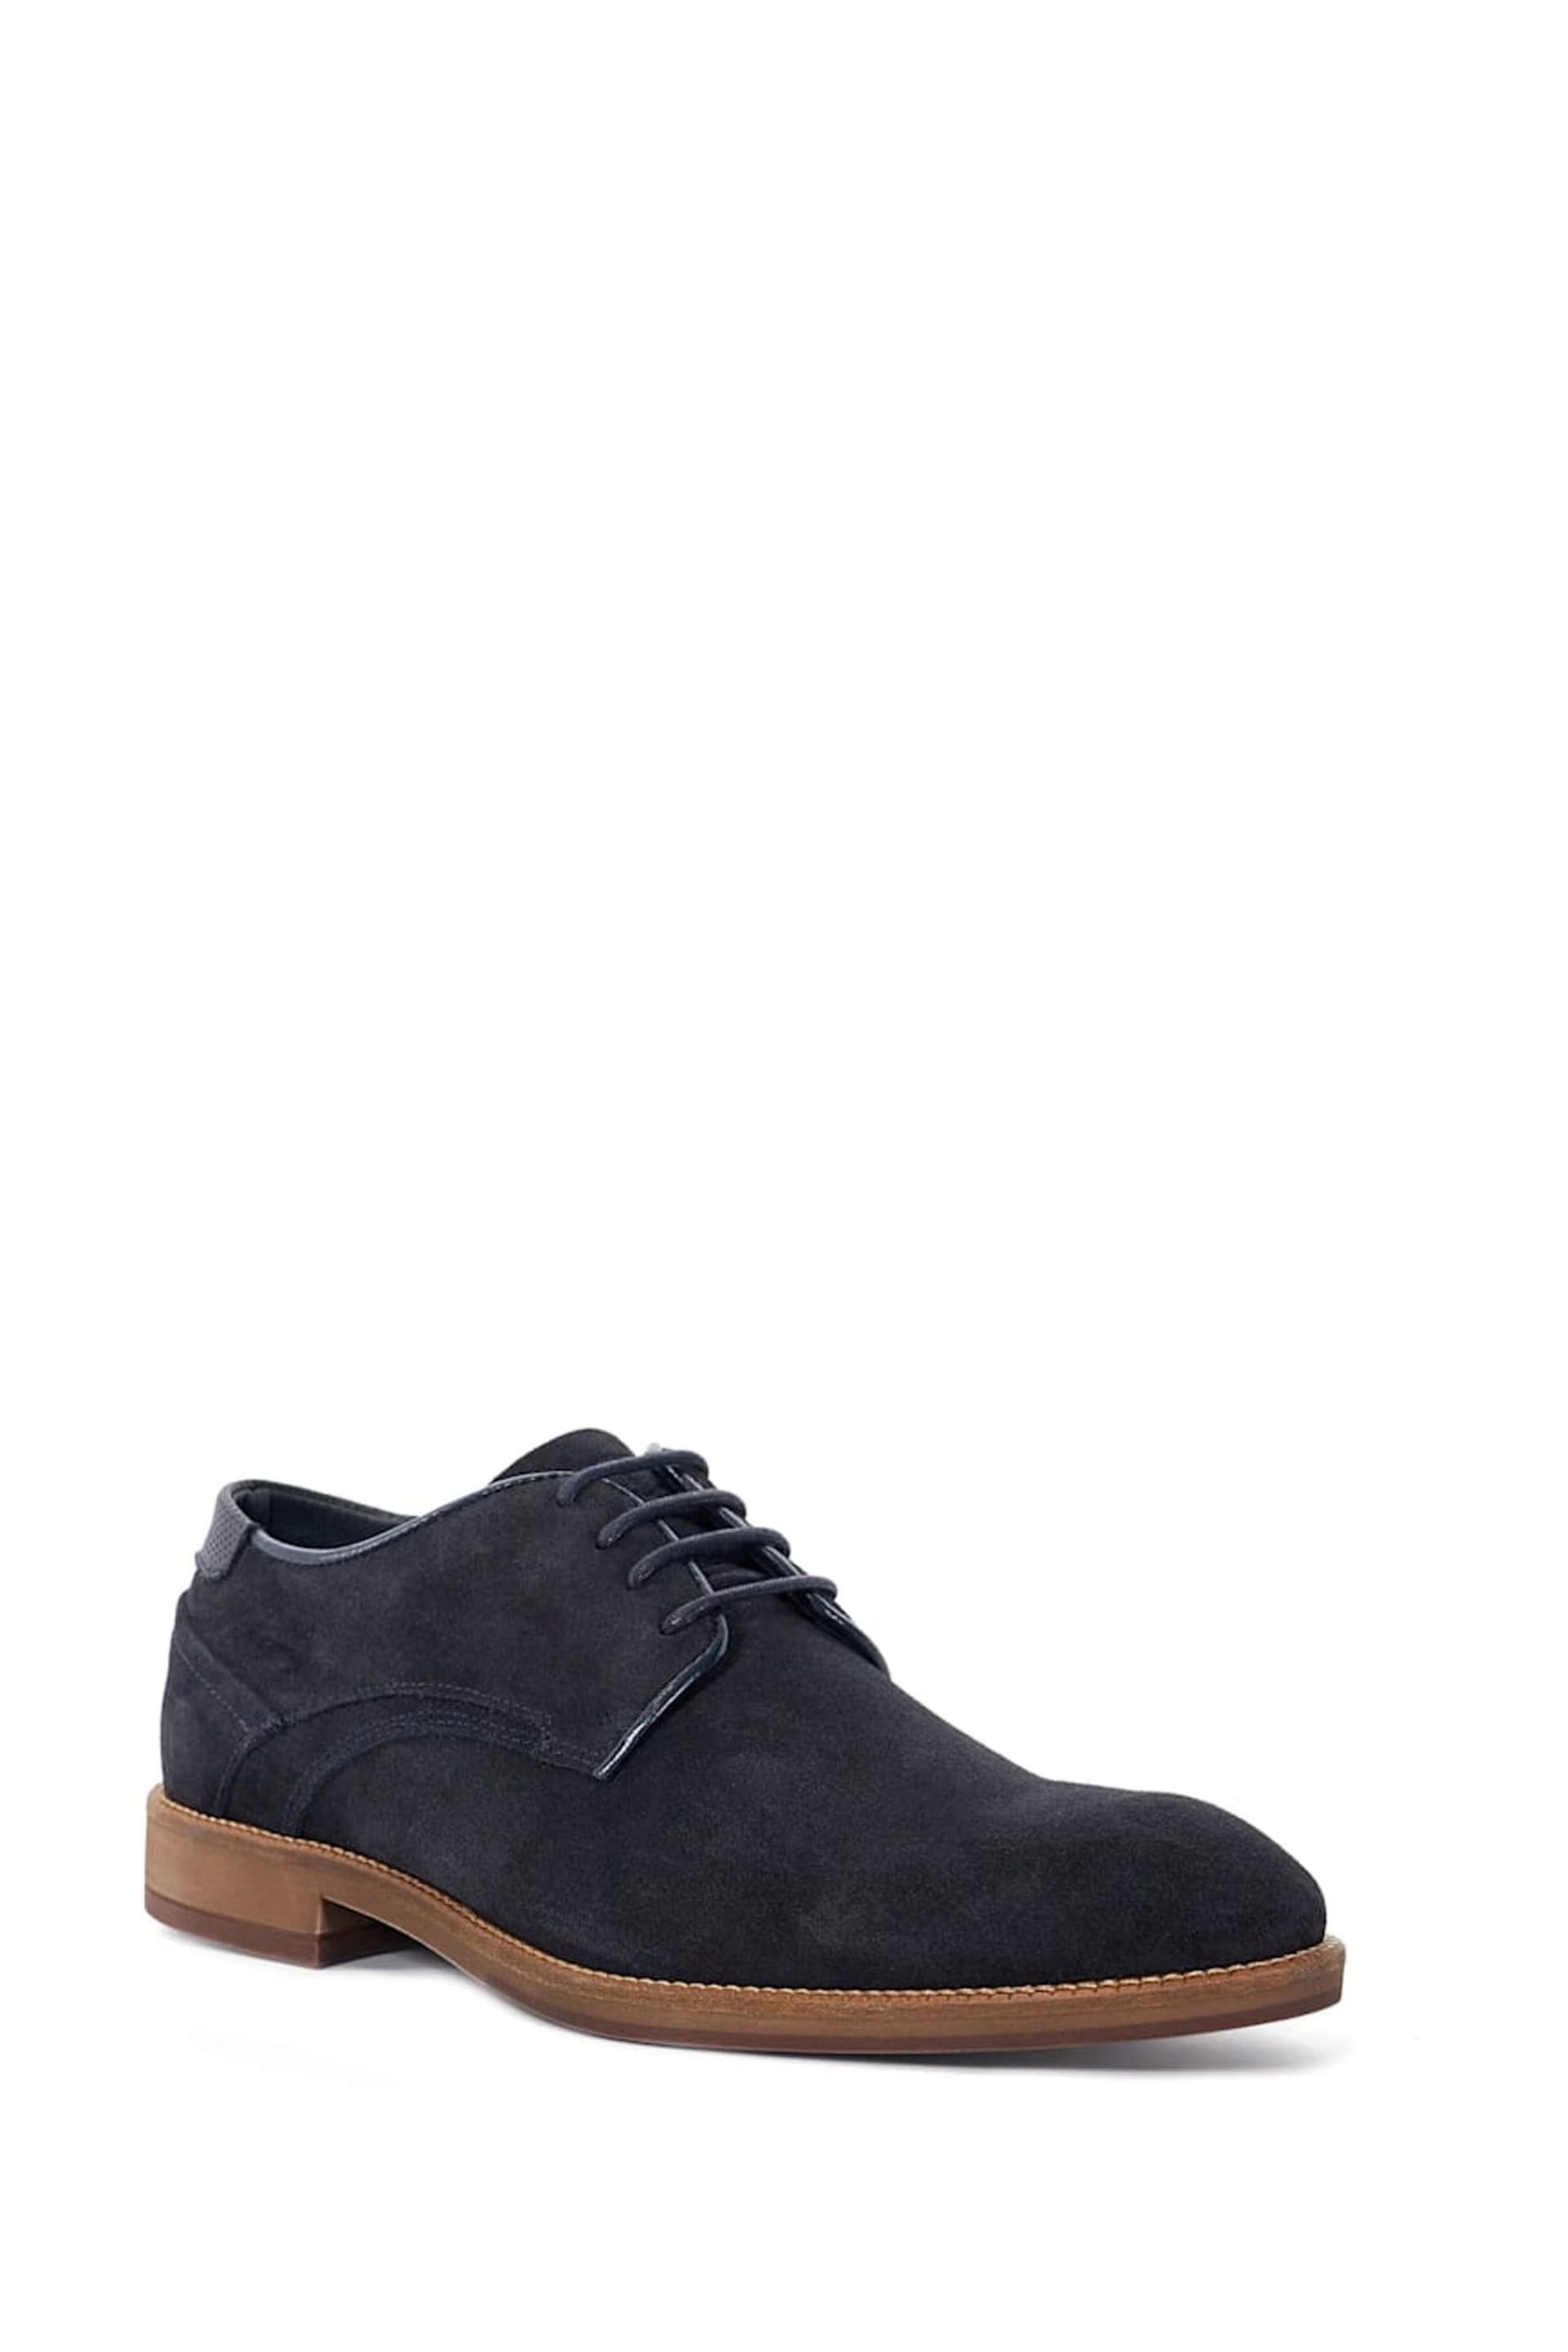 Dune London Blue Bridon Piped Gibson Casual Shoes - Image 2 of 5